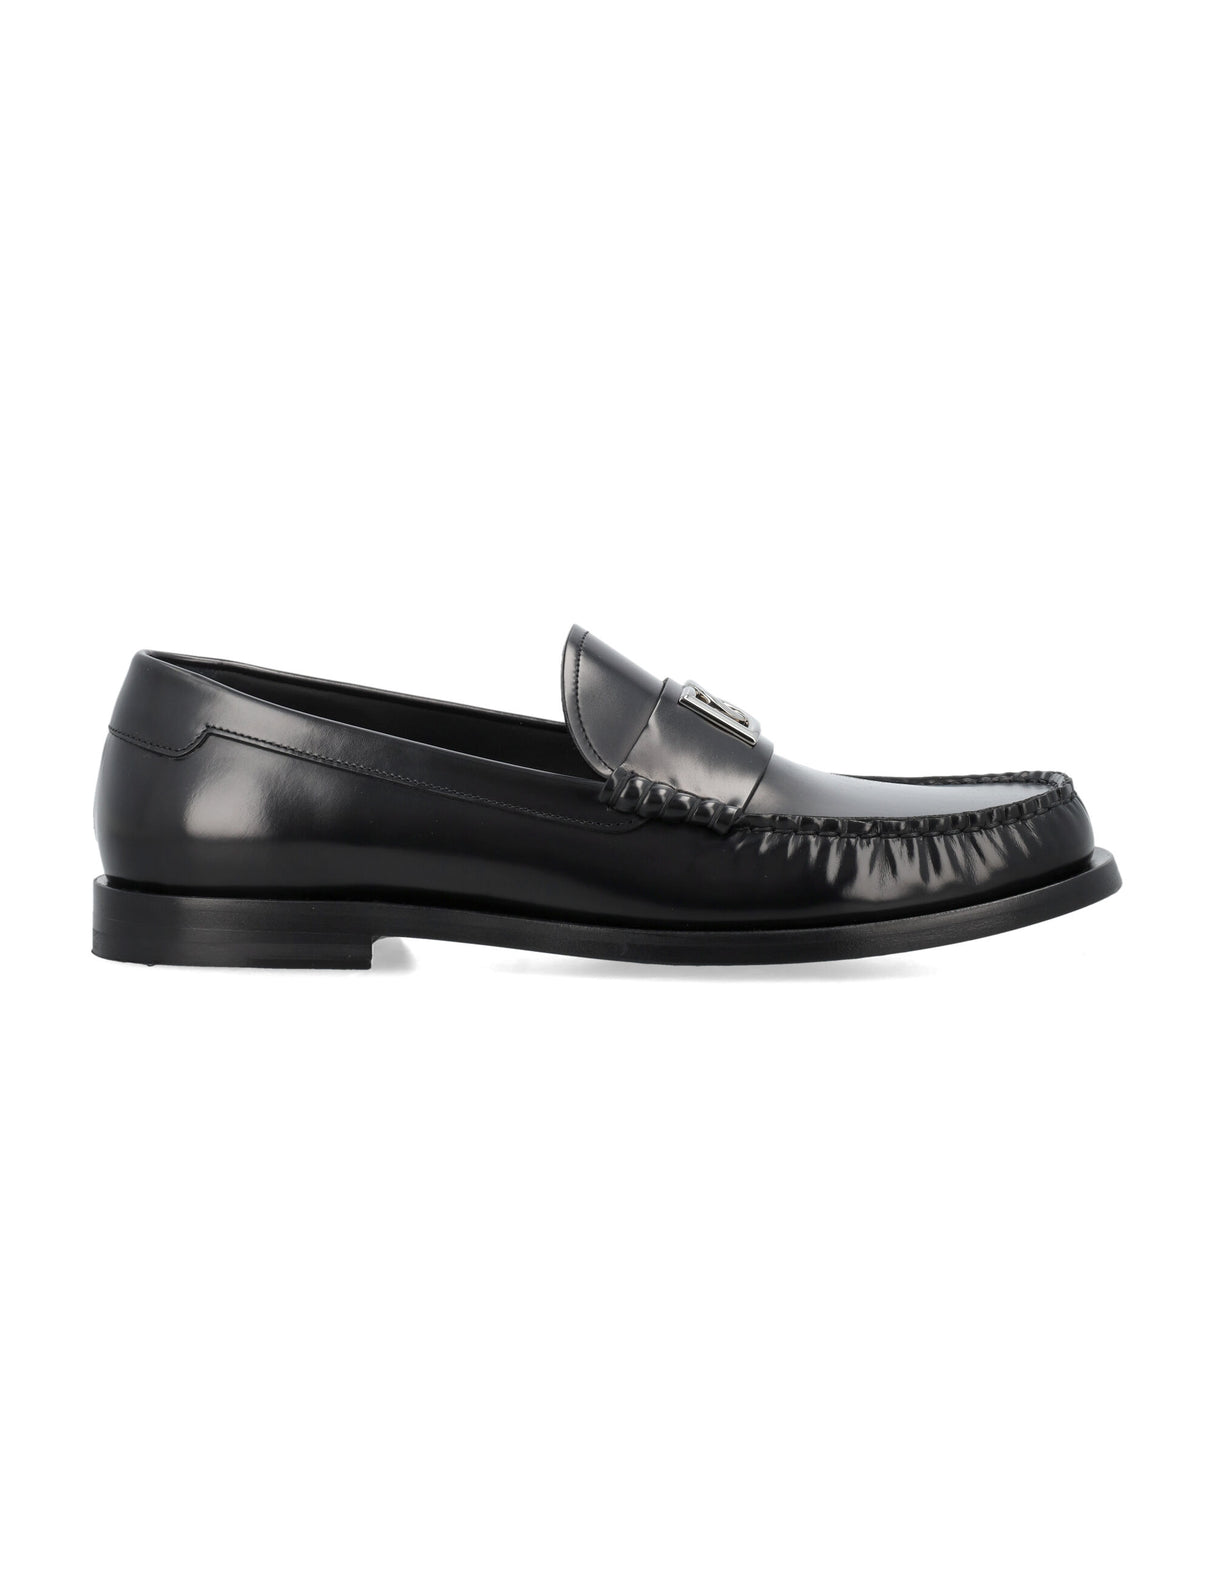 DOLCE & GABBANA Classic Black Loafer for Men - Stylish Slip-On Designs from SS24 Collection